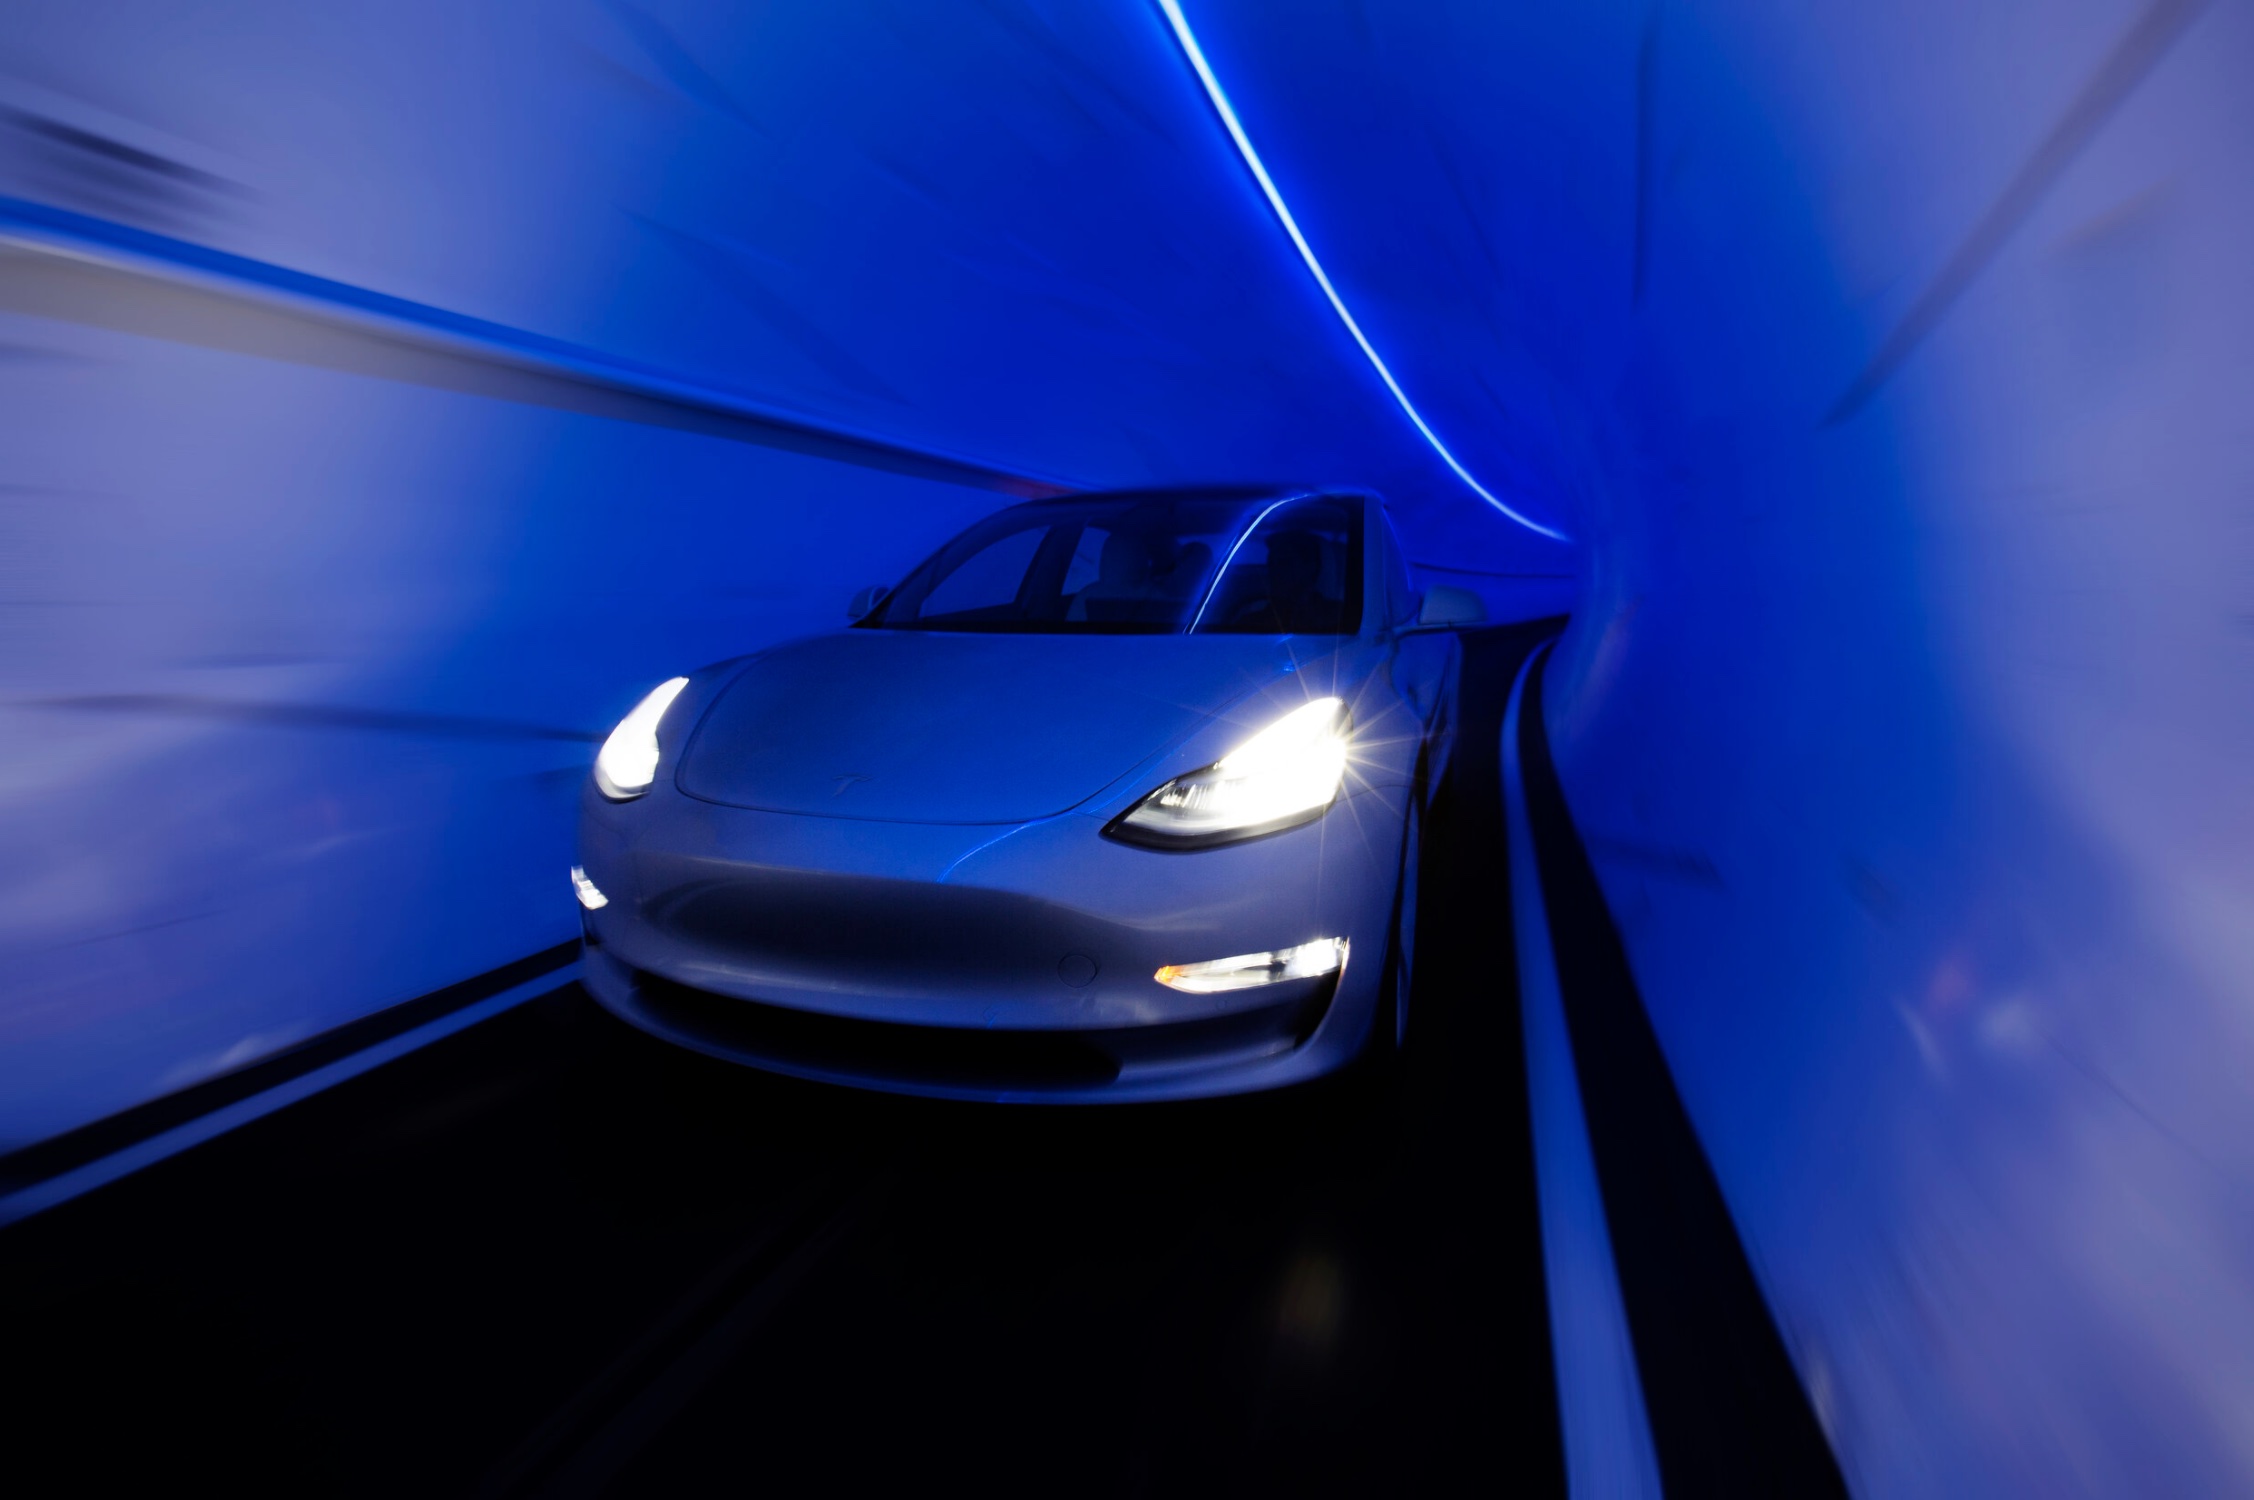 Kentucky may be next to get an Elon Musk Boring Company tunnel